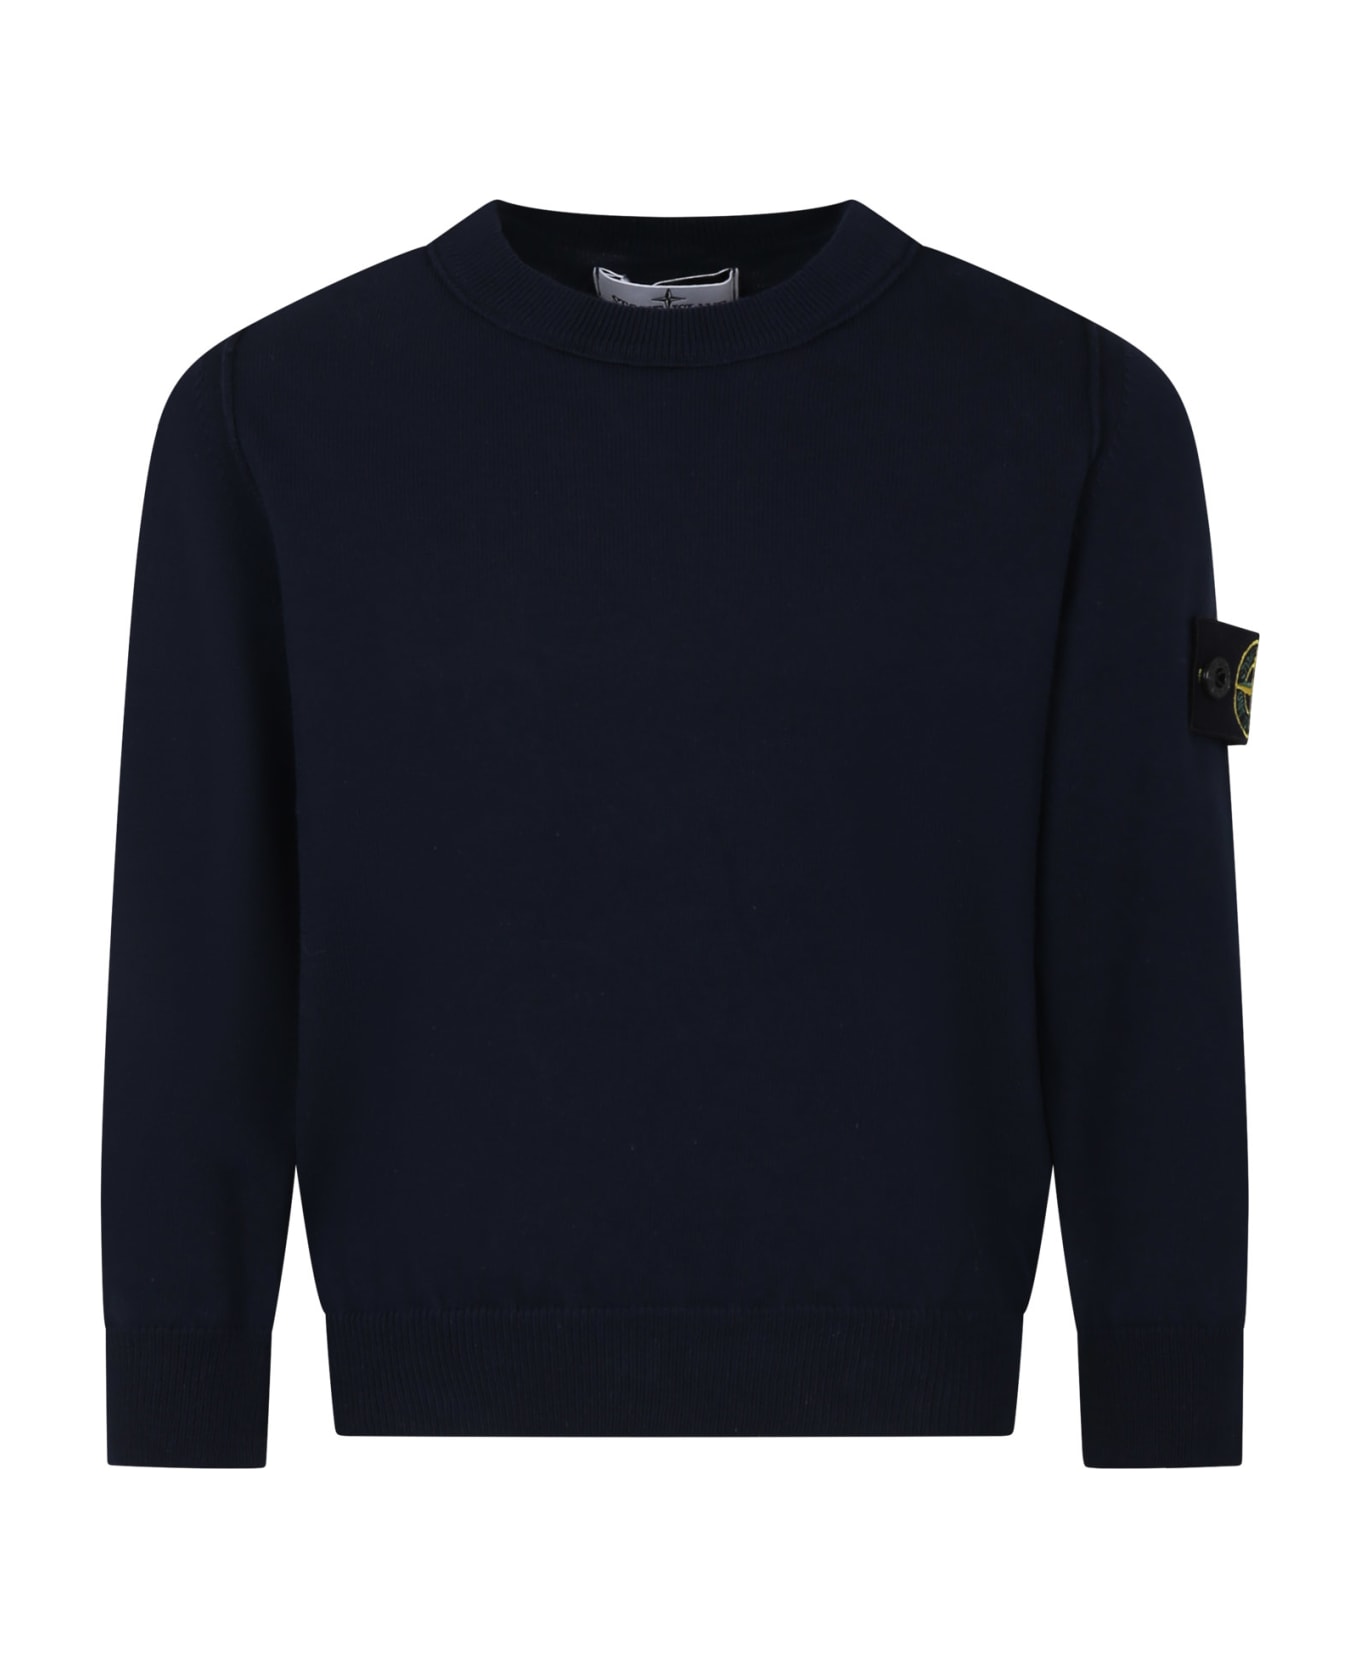 Stone Island Junior Blue Sweater For Baby Boy With Compass - Navy blue